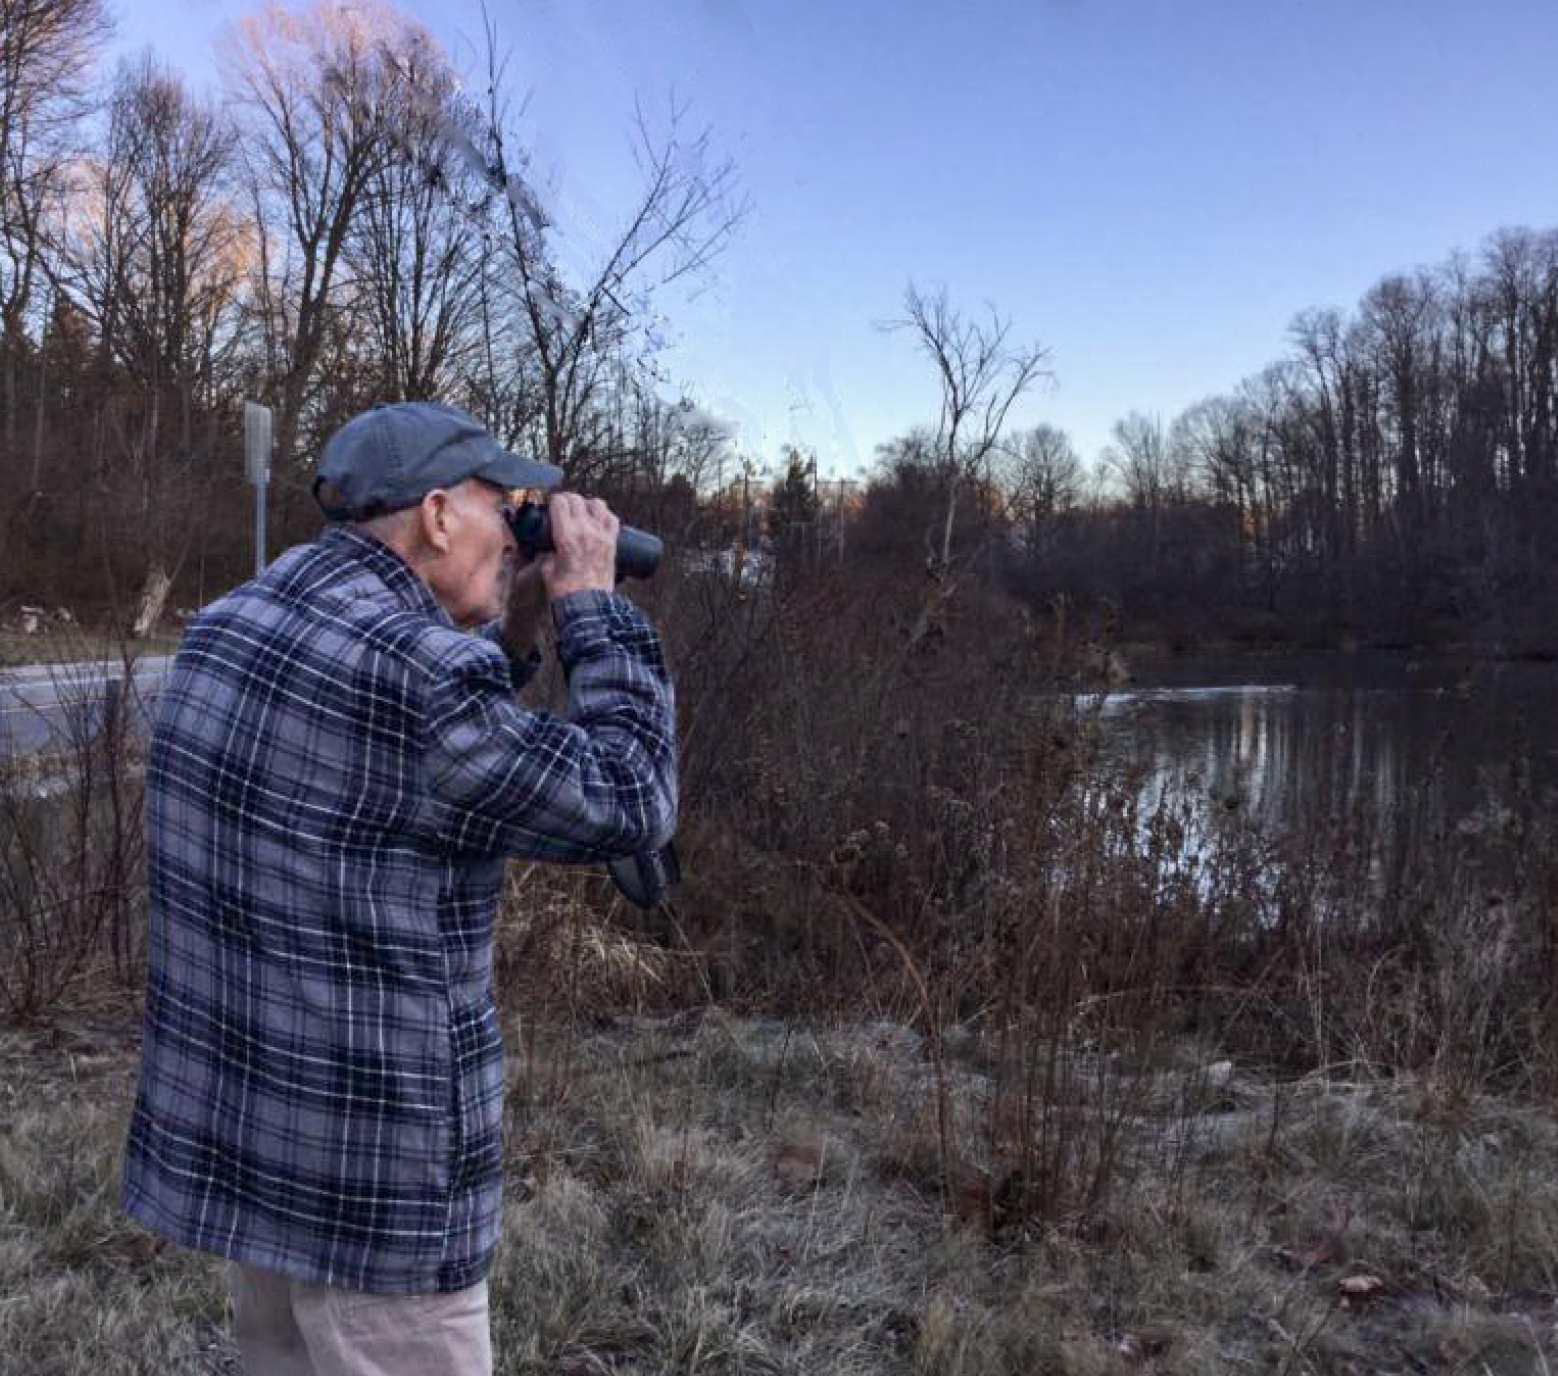 an elderly man in a blue plaid shirt looks away from the photographer, through binoculars, at a late-winter pond and trees